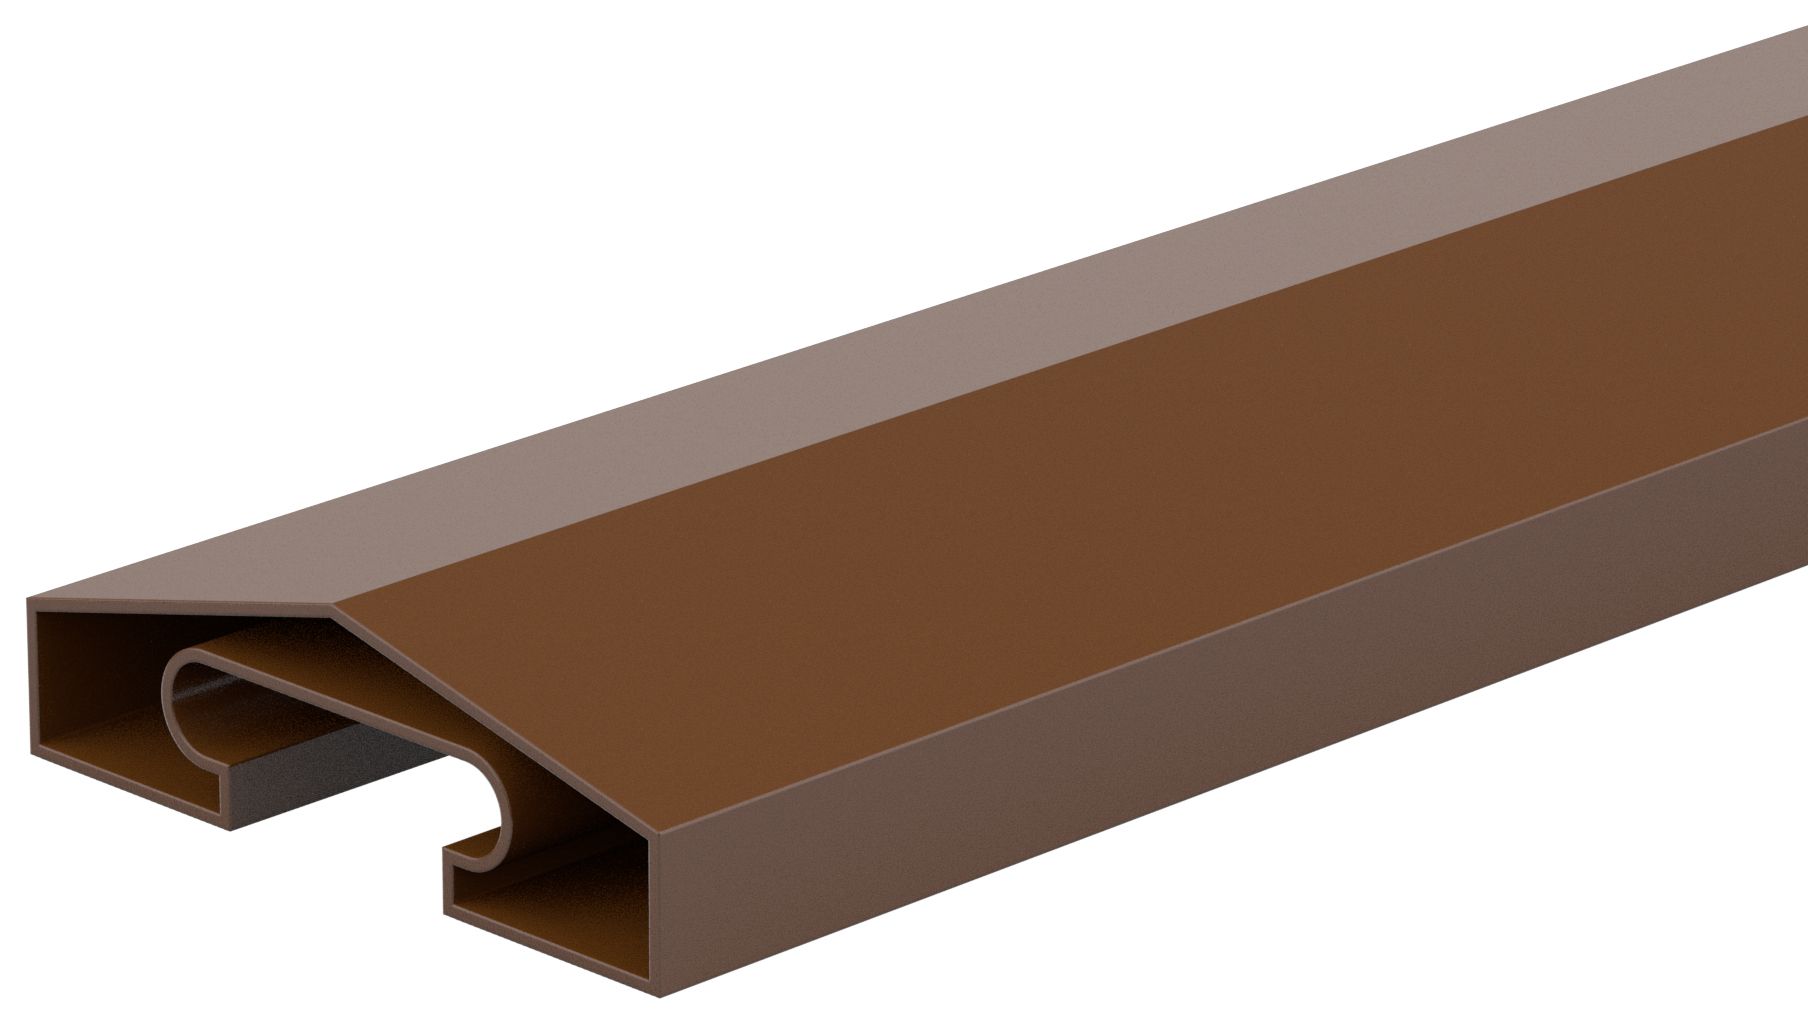 Image of DuraPost Capping Rail Sepia Brown - 1830mm